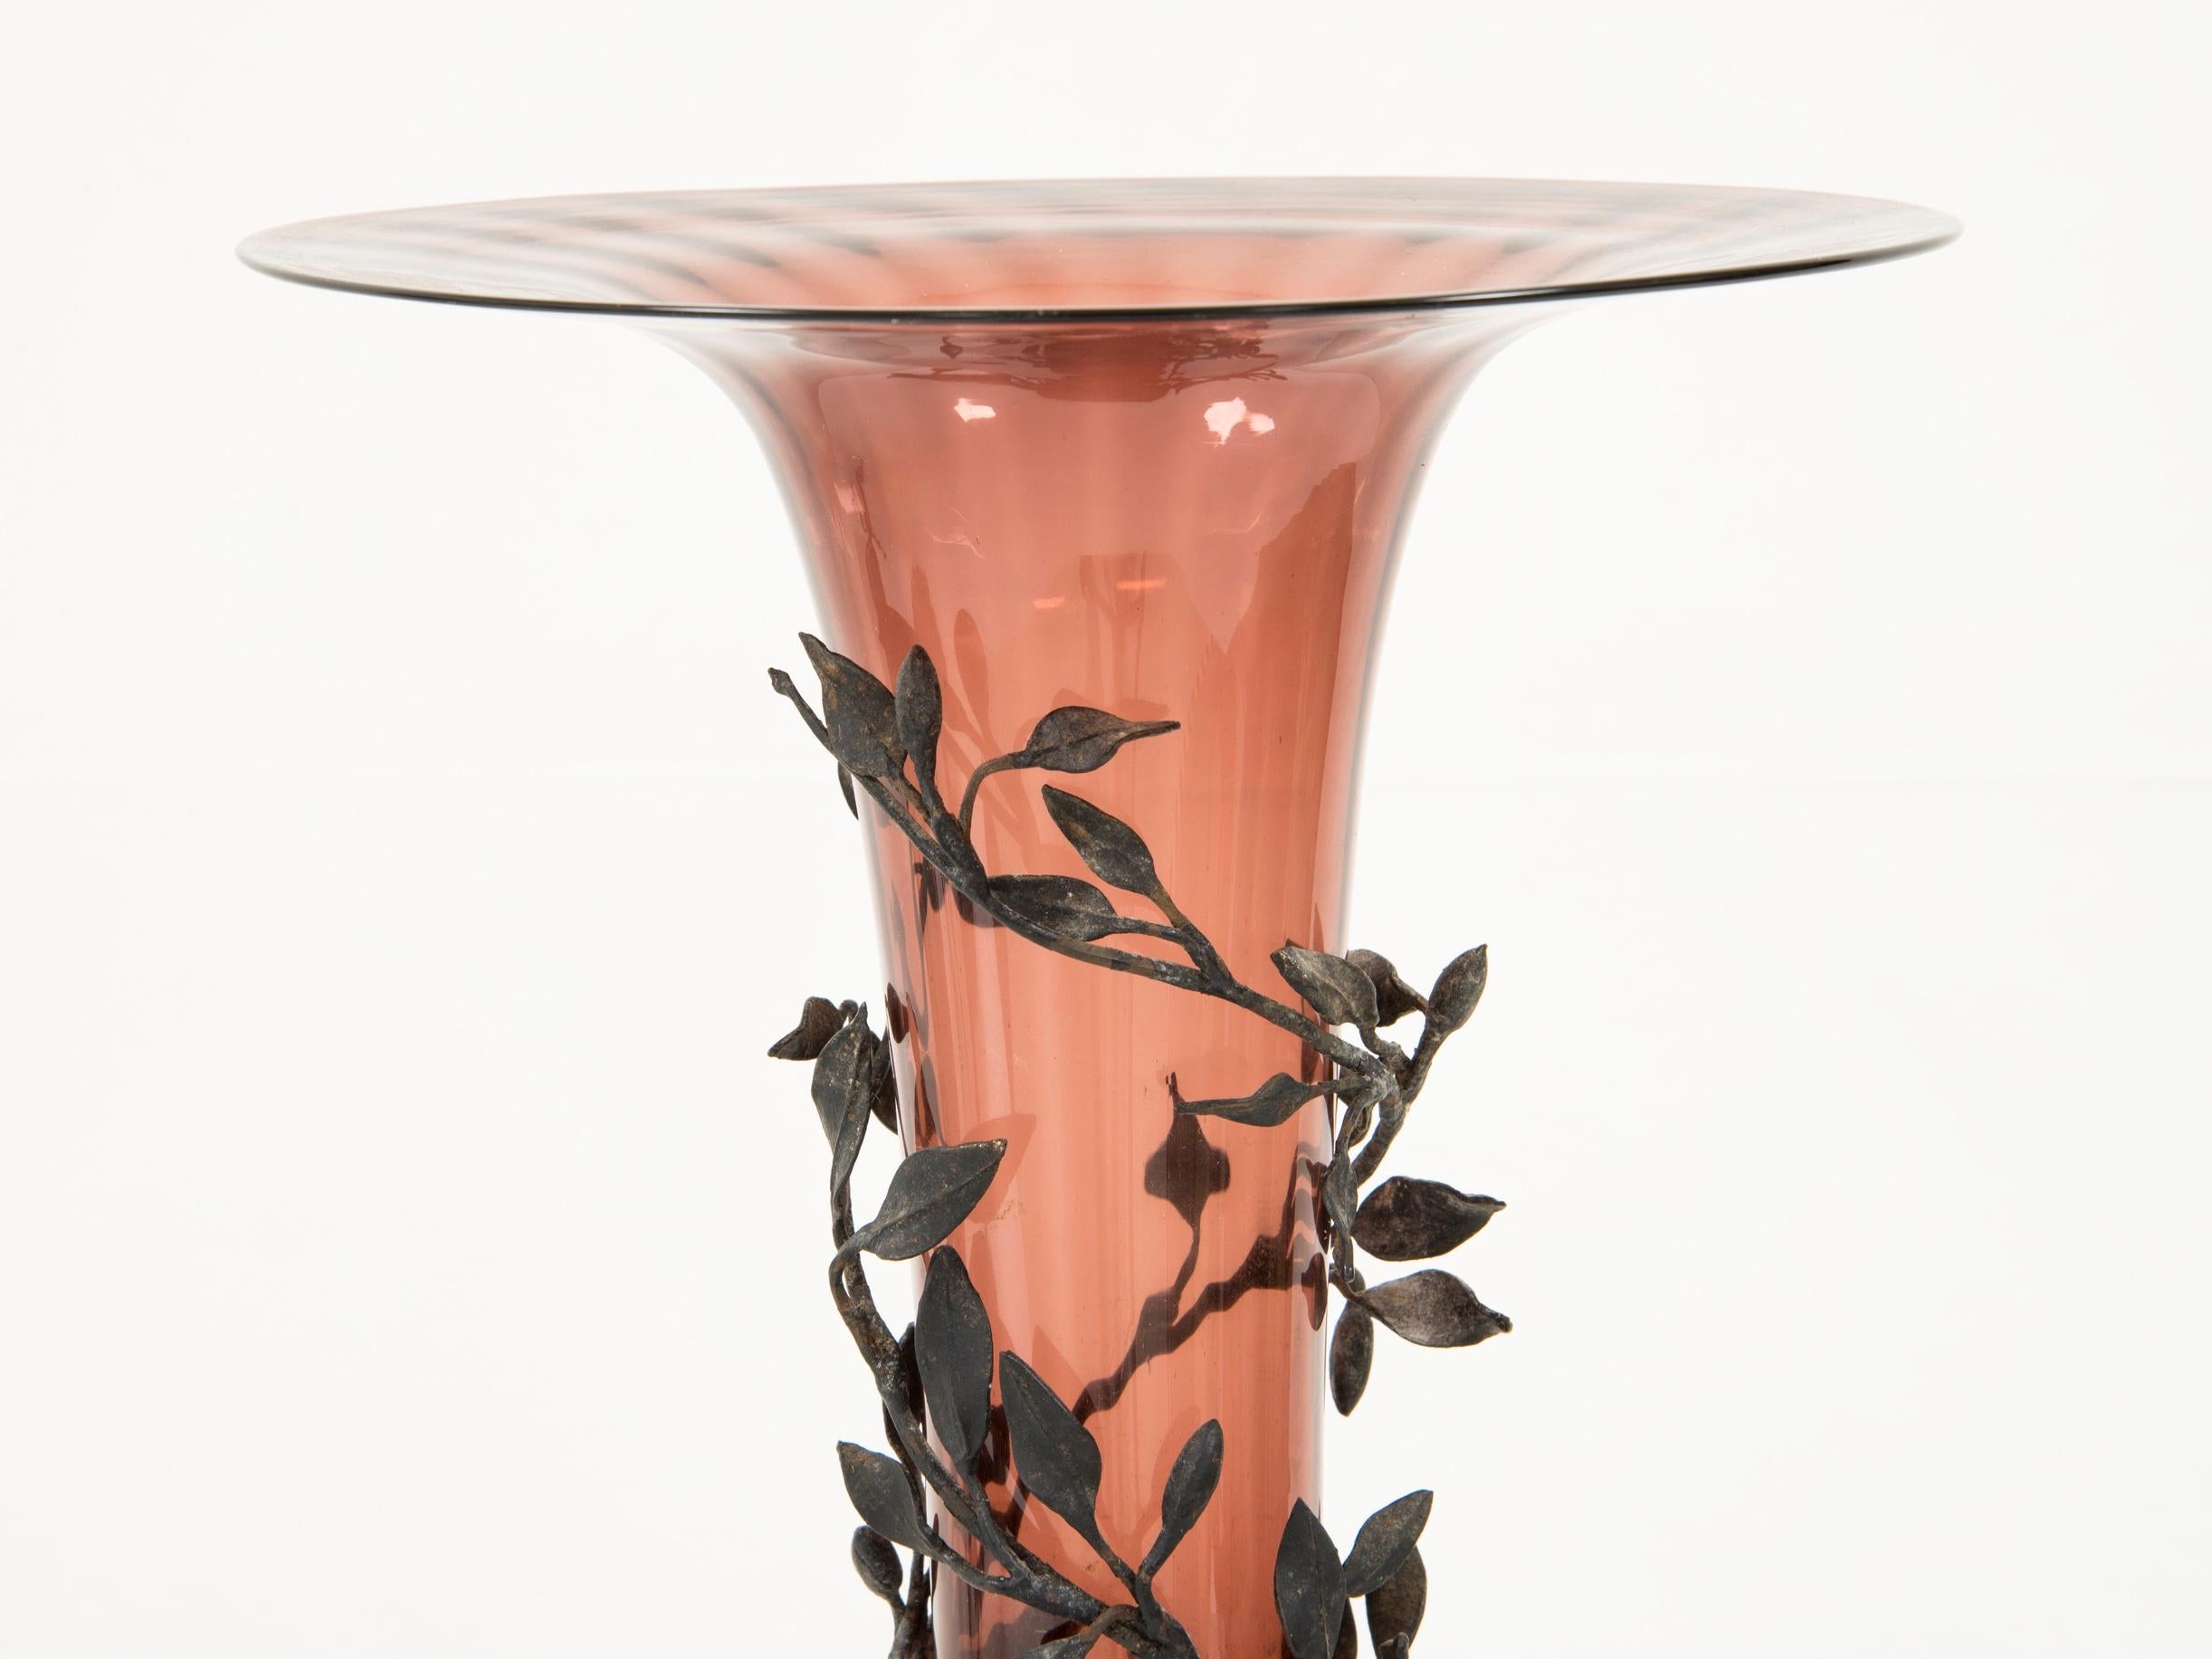 Umberto Bellotto
Vase
Blown glass and wrought iron
Italy, circa 1915
Measures: H 53 x D 27 cm

The work in wrought iron represents flowers and small leafs.